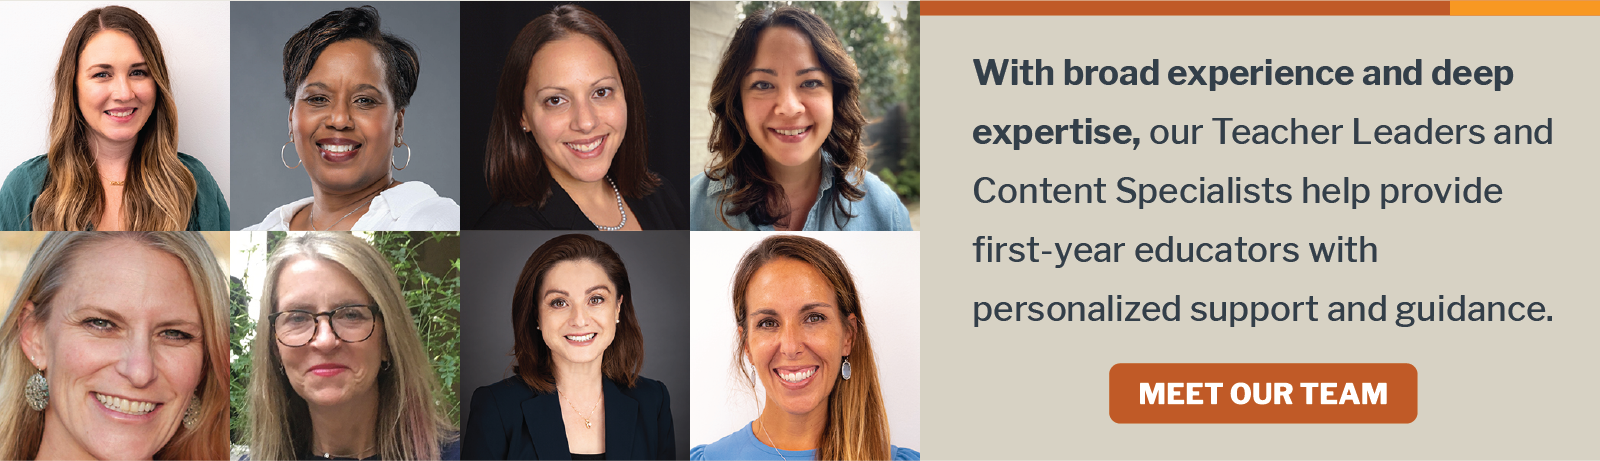 This banner features nine headshot-style portraits of the ten Texas Education START Teacher Leaders and Content Specialists. To the right is text reading 'With broad experience and deep expertise, our Teacher Leaders and Content Specialists help provide first-year educators with personalized support and guidance.' Below the paragraph is a burnt orange button with text reading 'MEET OUR TEAM'.